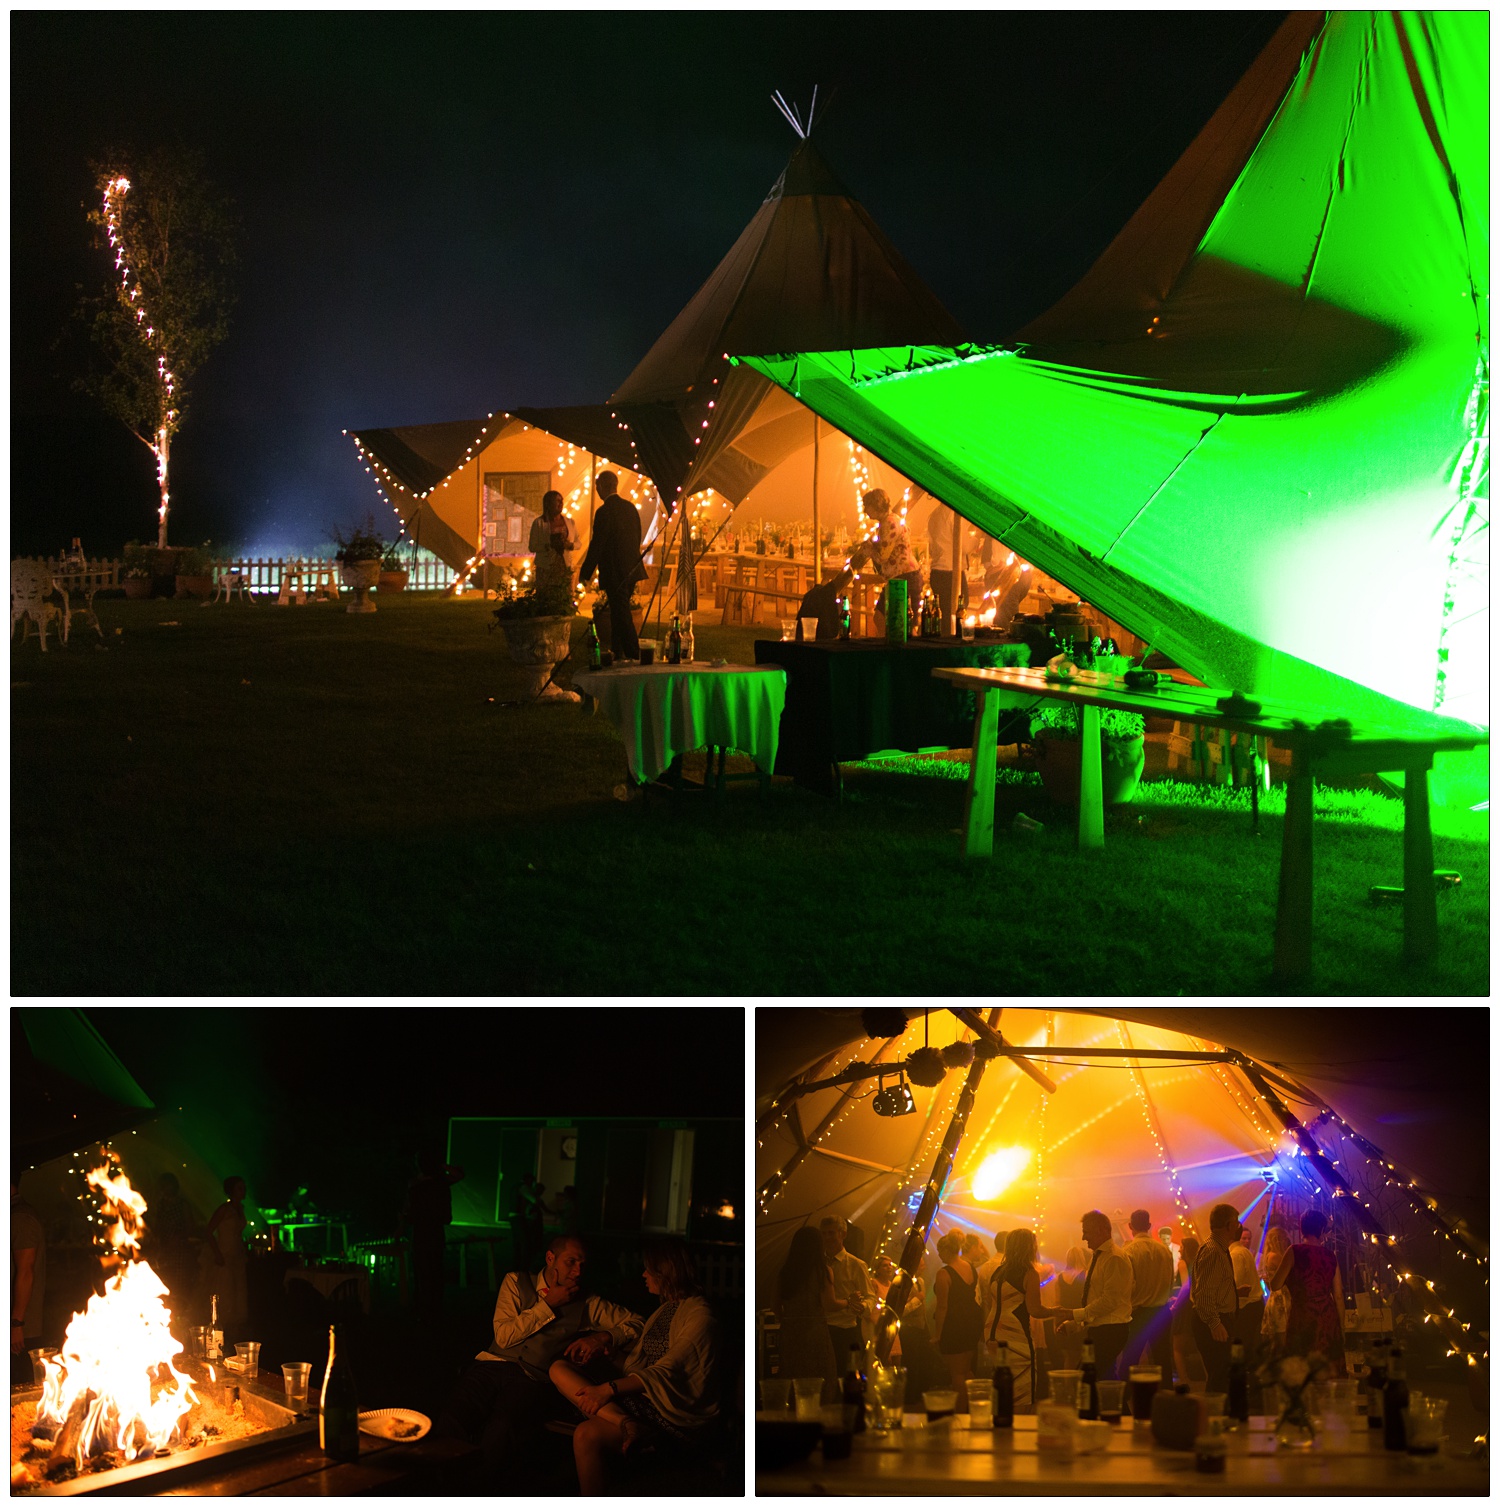 A Tentipi for a wedding reception is lit up green and orange, there is a fire pit people are sat next to, and in the tipi there are people dancing under orange and purple lights. It is nighttime at a wedding near South Woodham Ferrers.